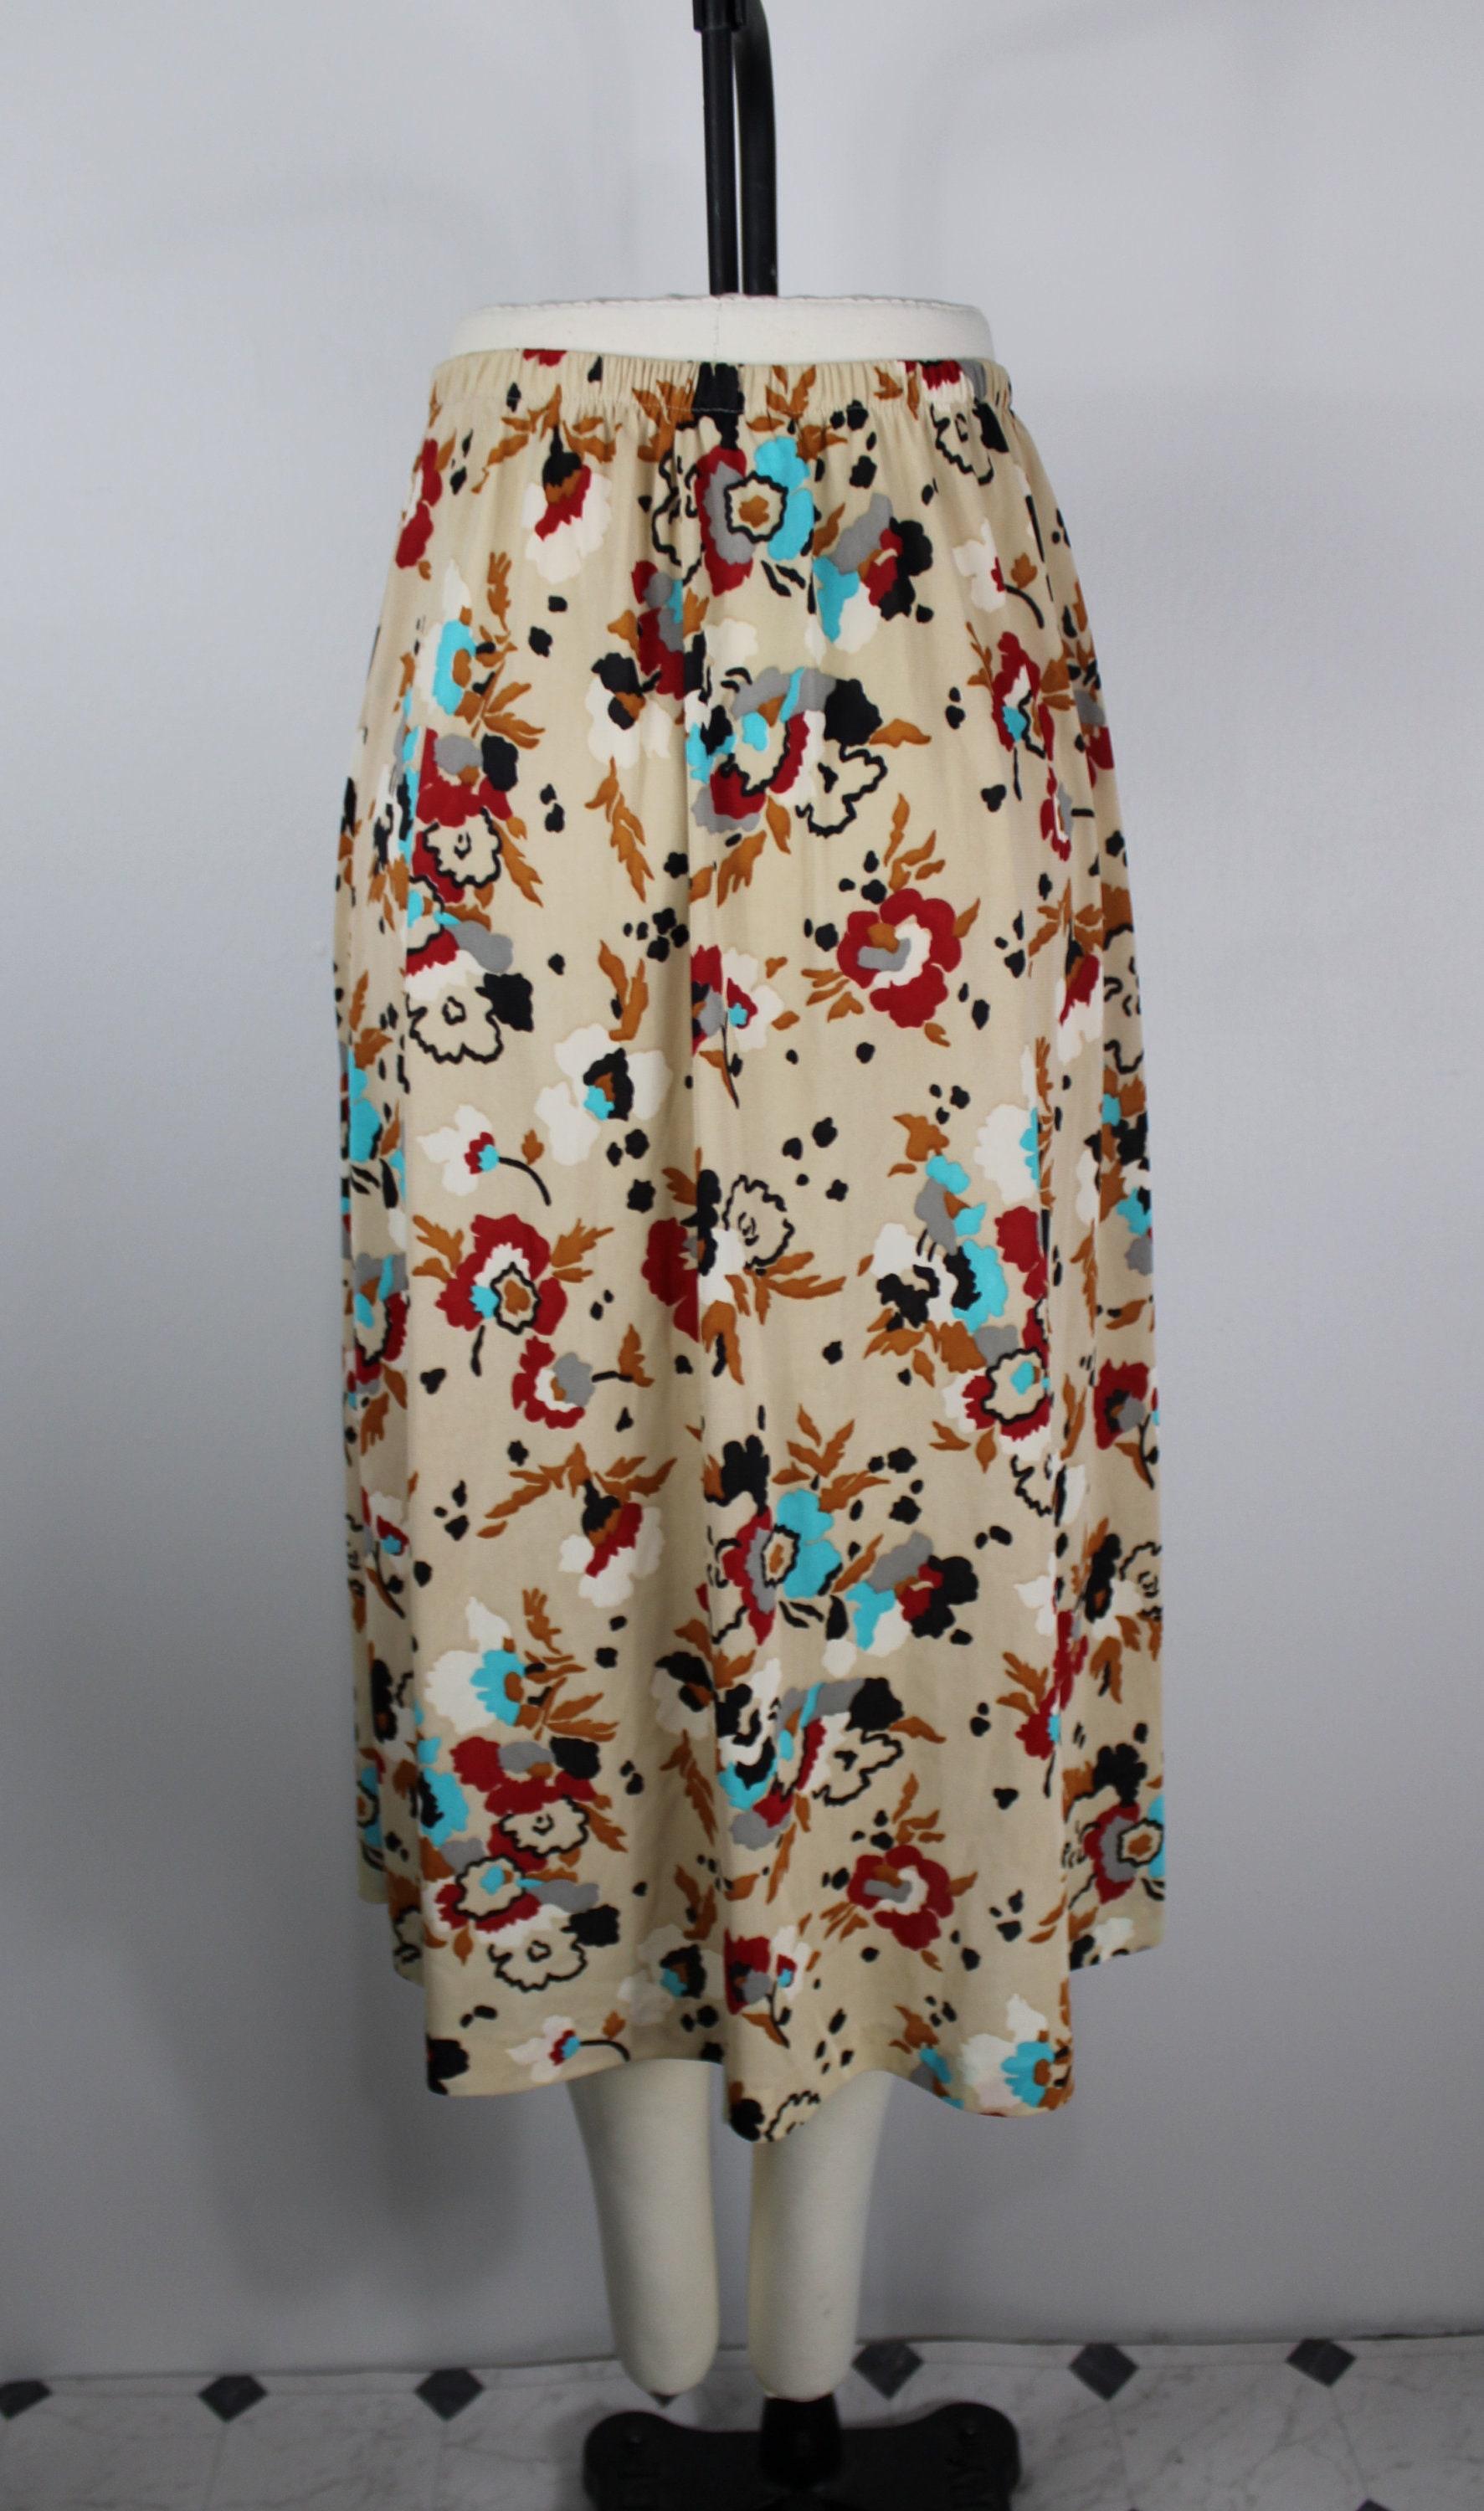 Vintage 1960's/70's Floral Patterned Skirt by Sears - Etsy